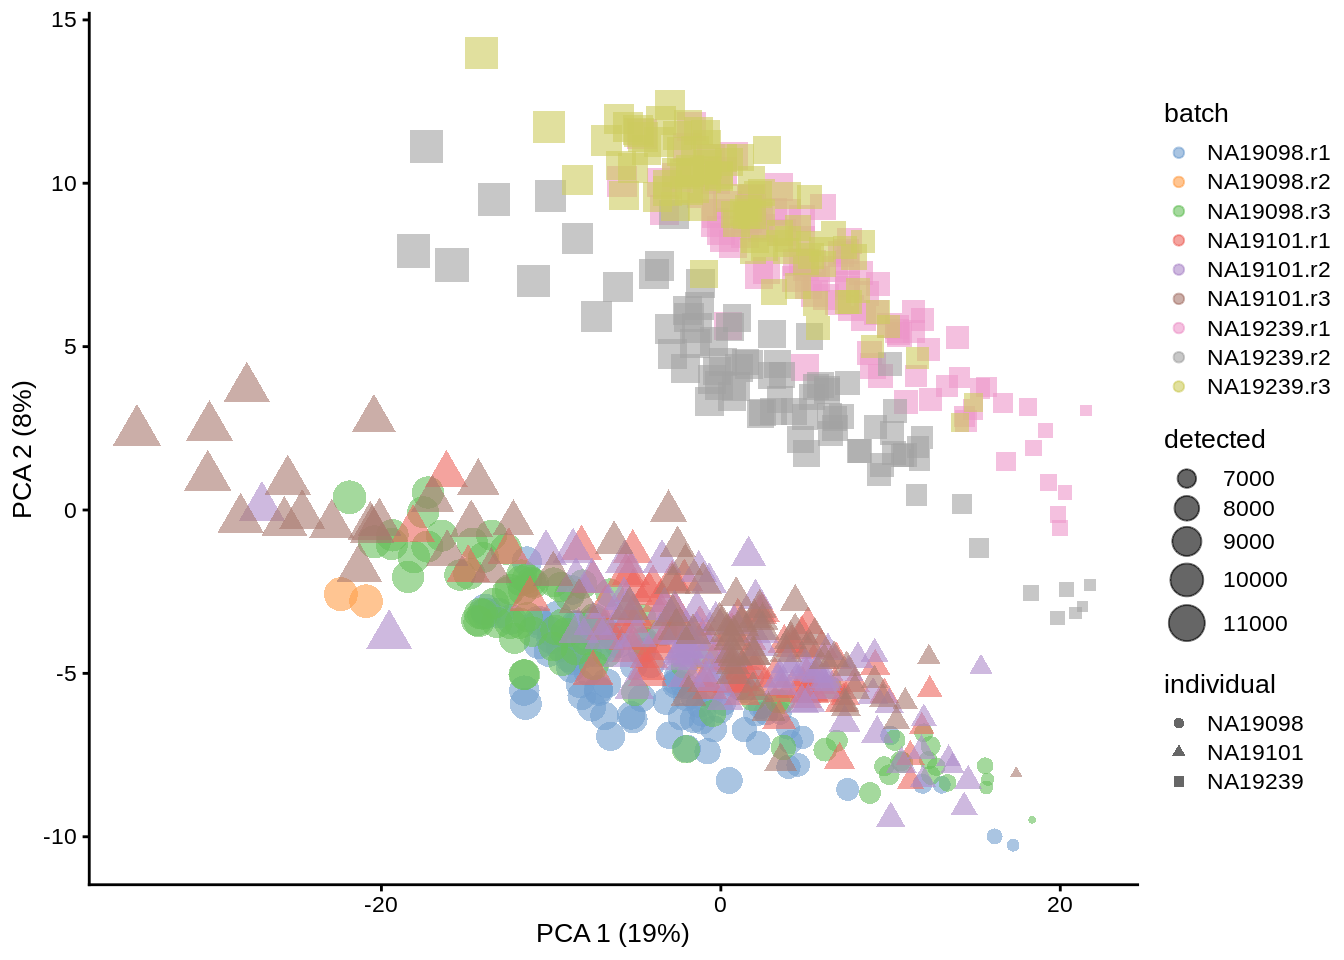 PCA plot of the Tung data (non-normalized log counts, QC-filtered)